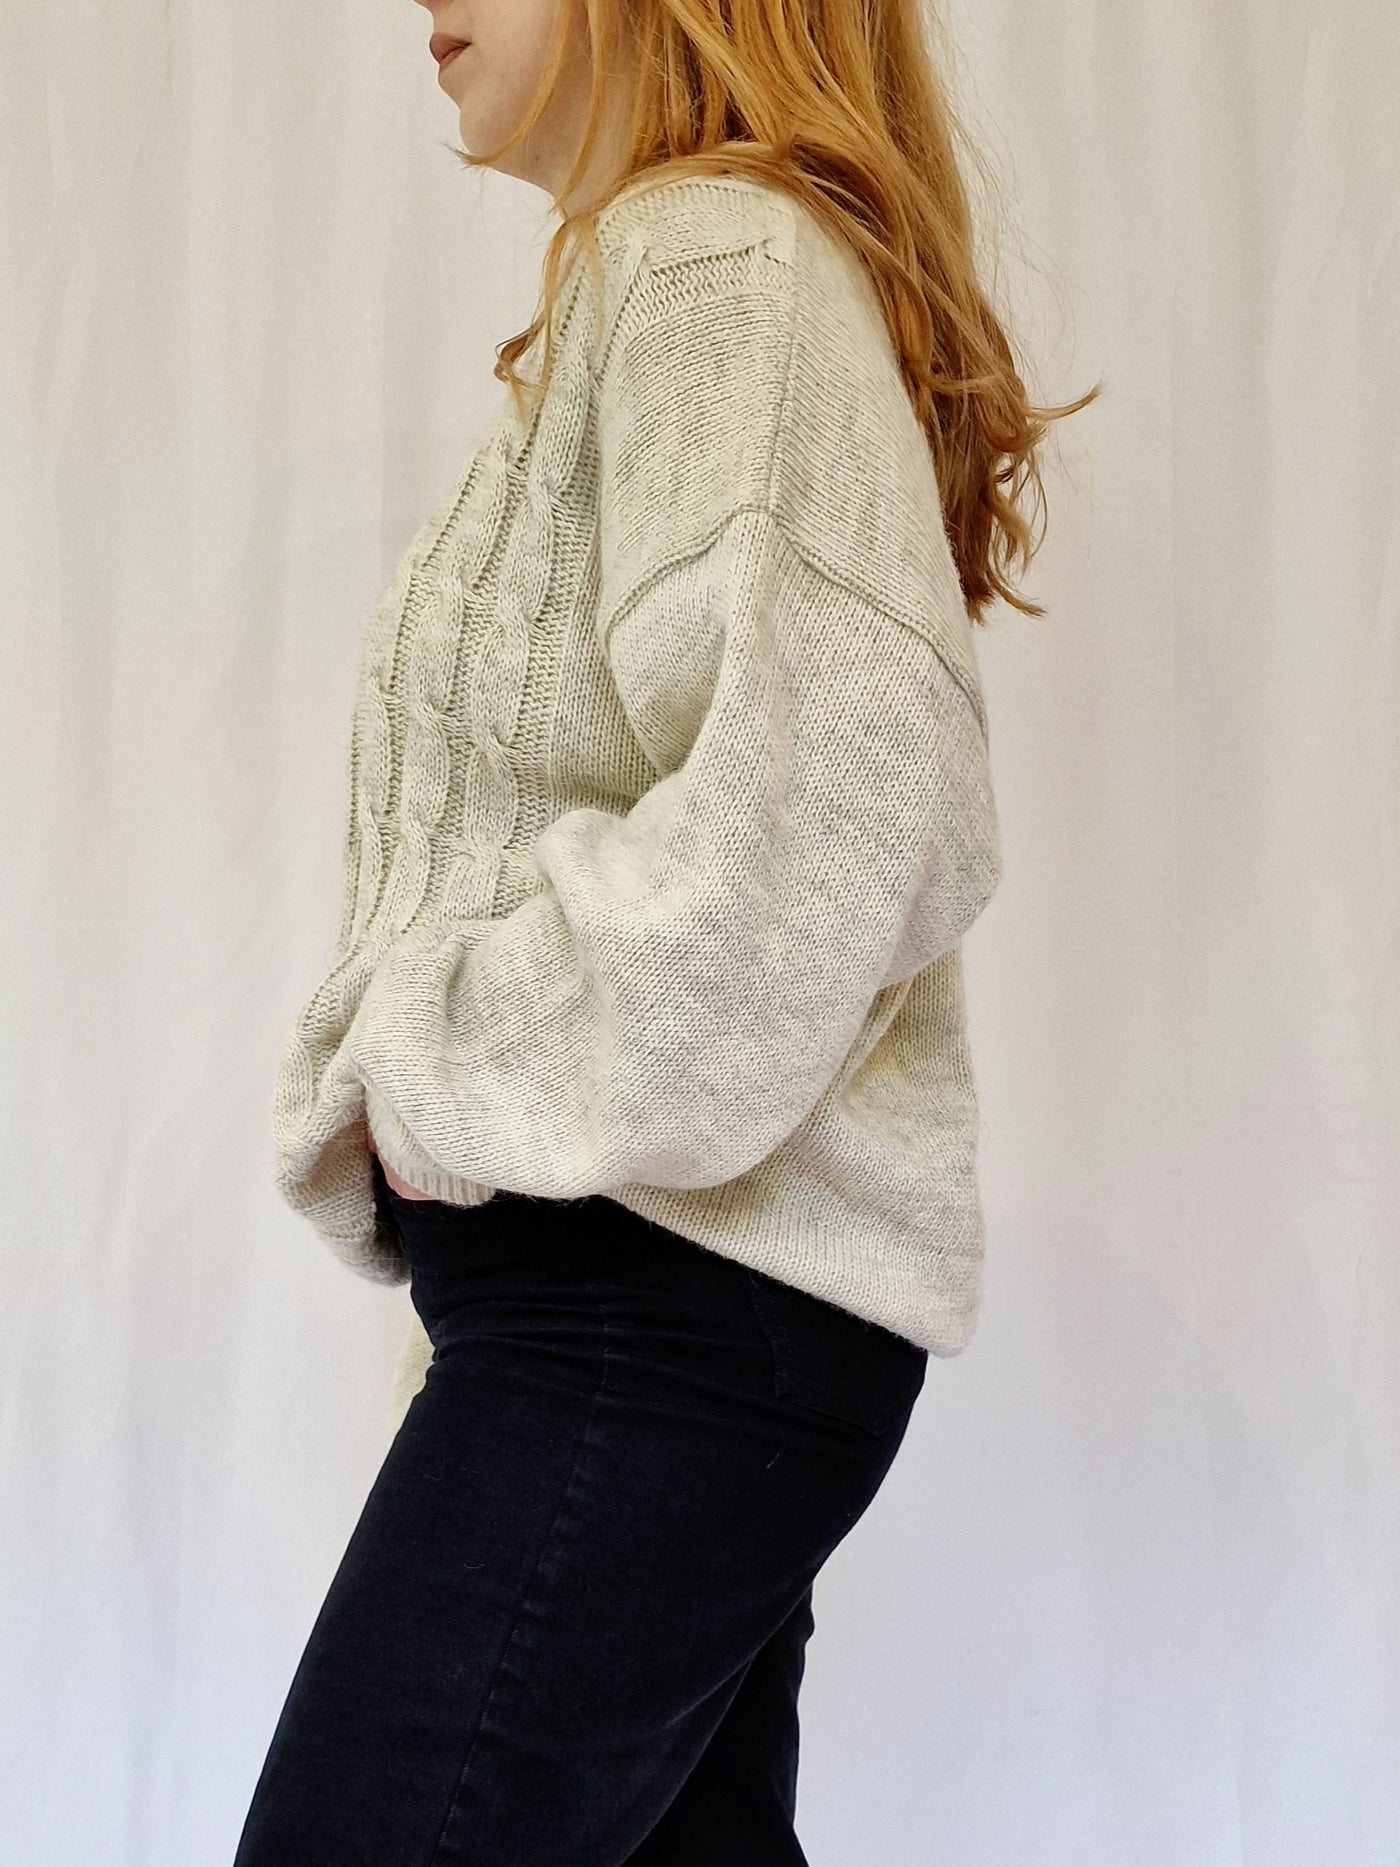 Vintage 90s Light Grey Aran Style Cable Knit Jumper with Crew Neck - XL